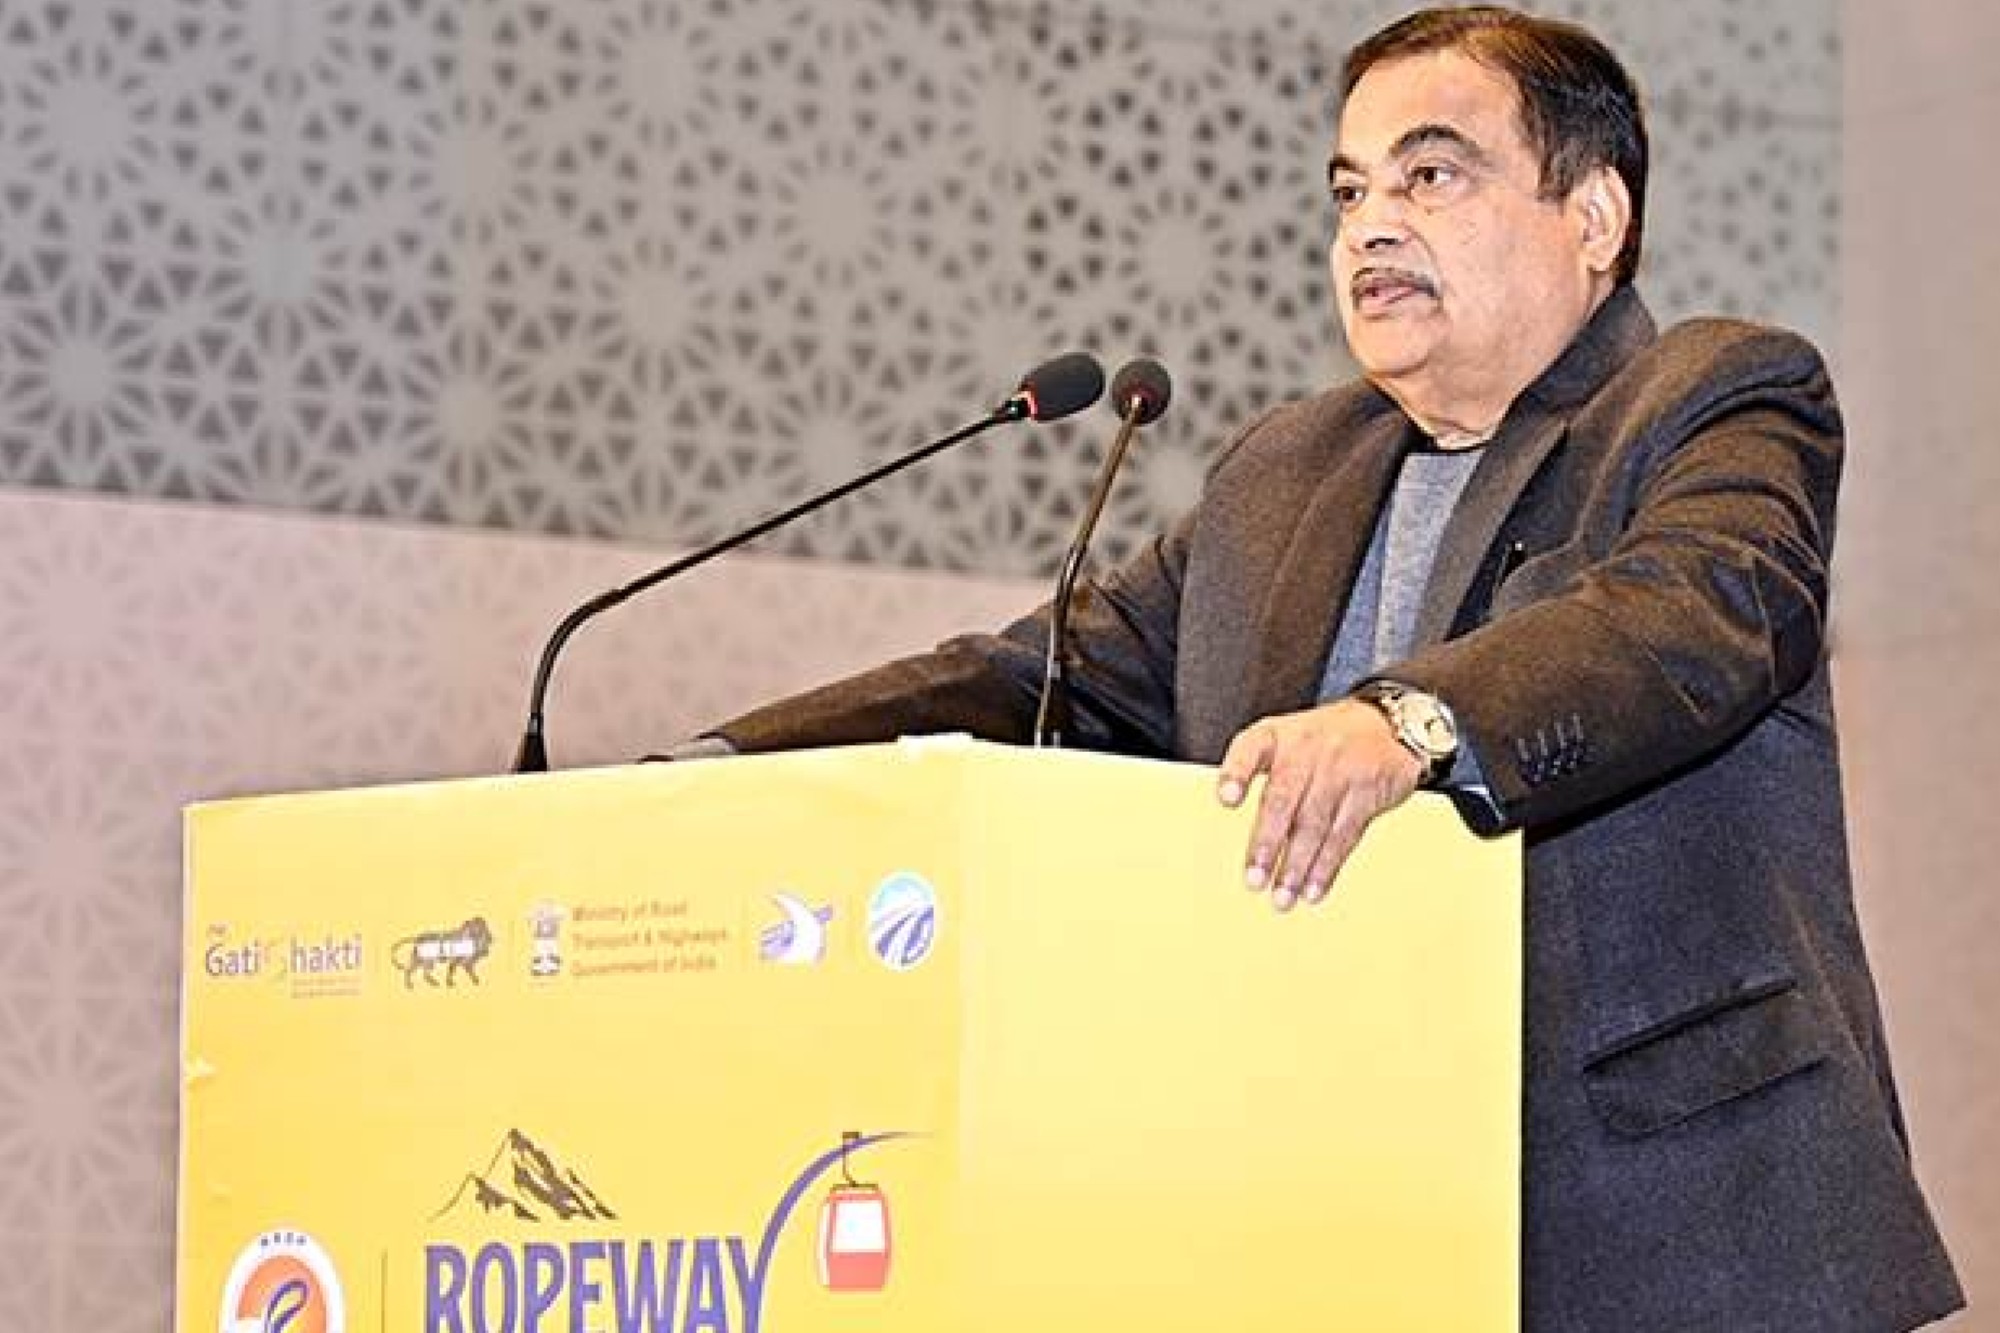 Union Minister for Road Transport and Highways, Nitin Gadkari, has unveiled an ambitious plan for the development of ropeway projects in India, announcing a substantial investment of INR 1.25 lakh crore for more than 200 projects over the next five years.